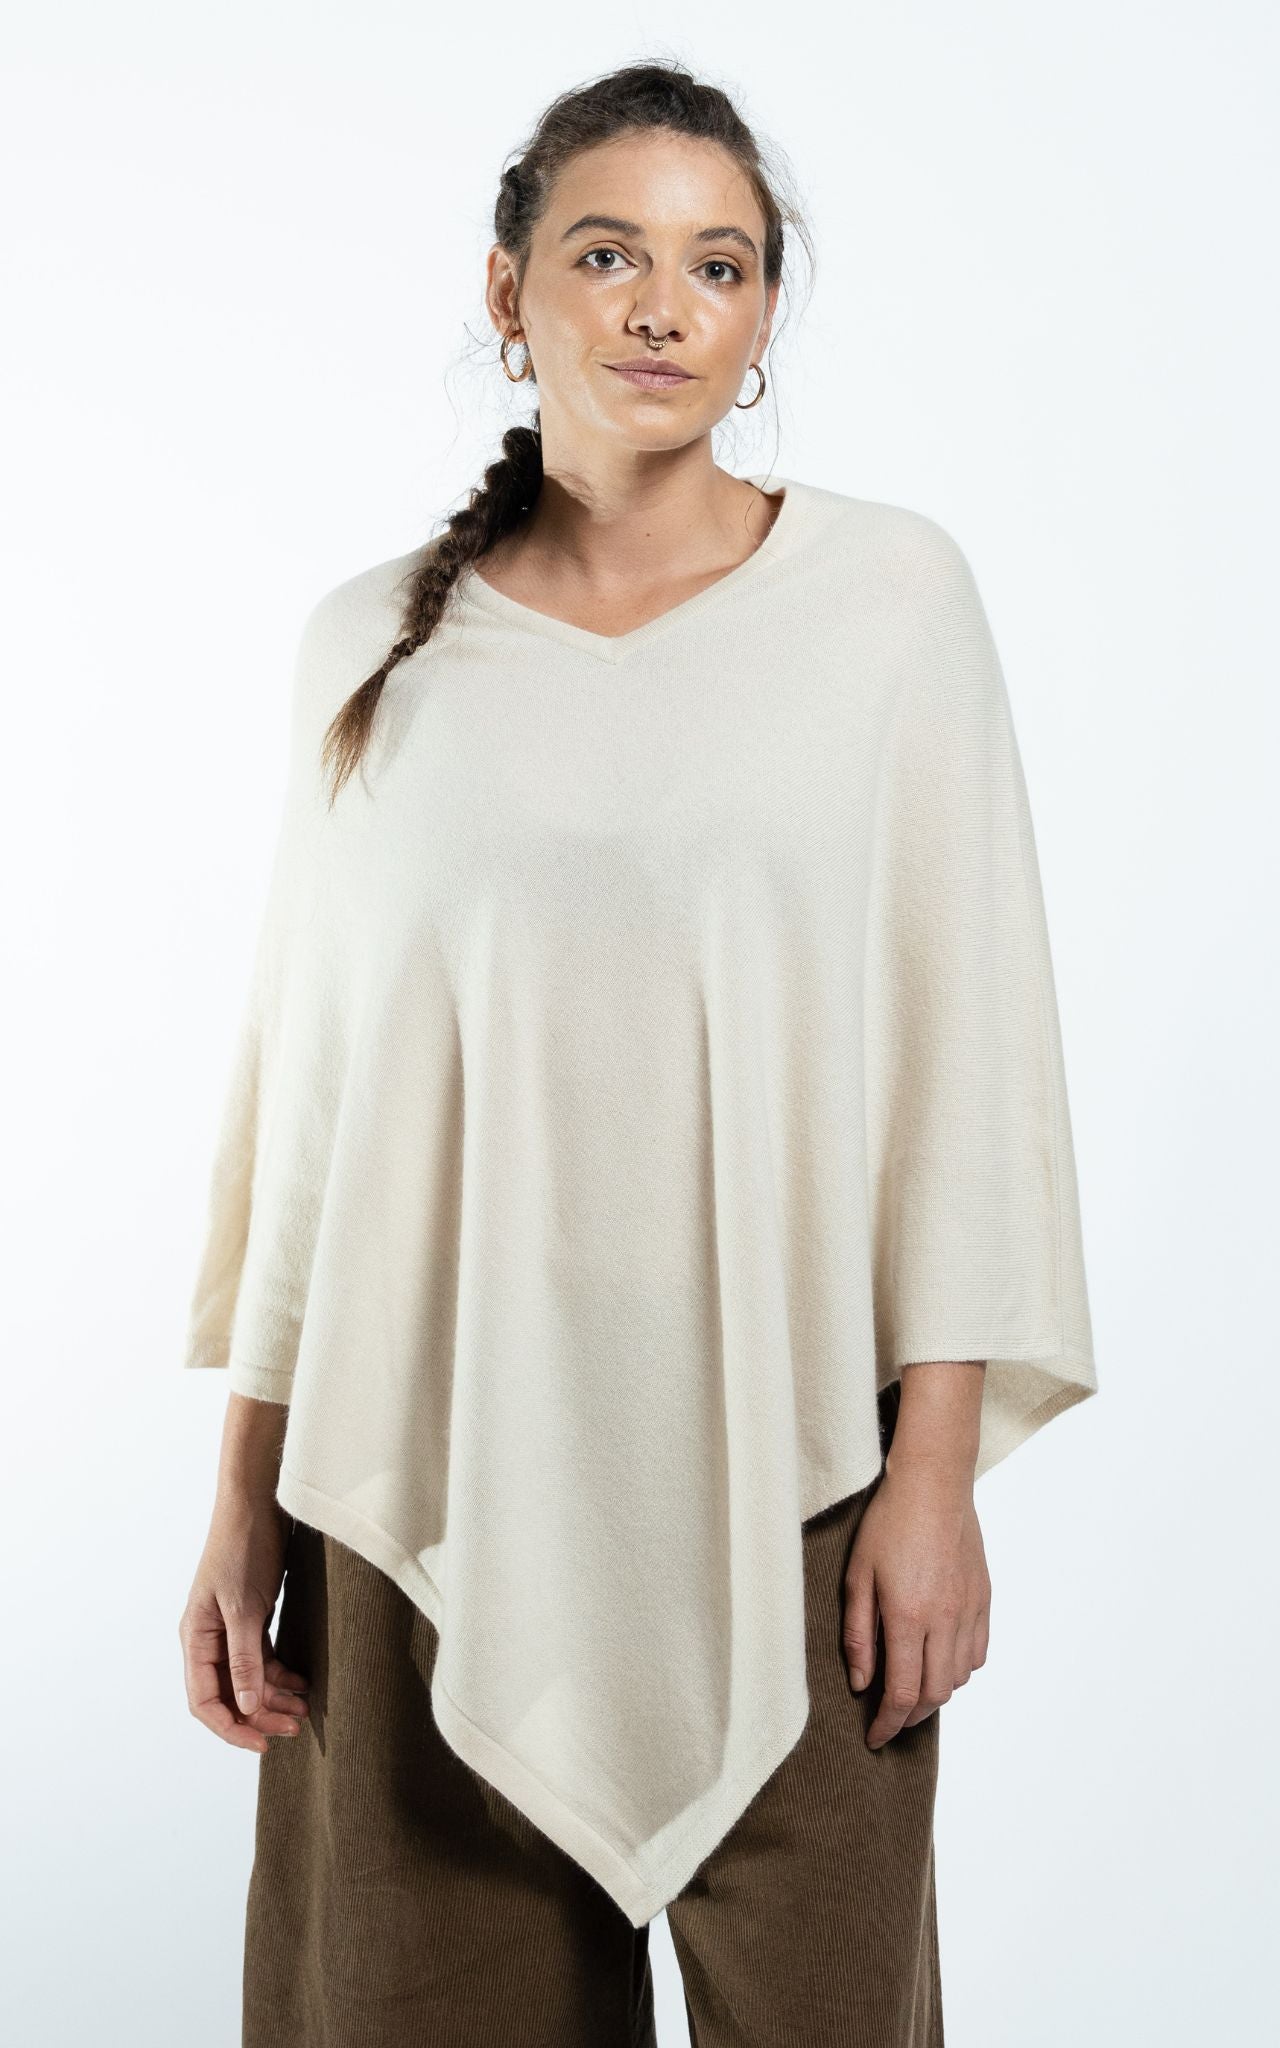 Surya Australia Ethical Cashmere Poncho made in Nepal - Oatmeal